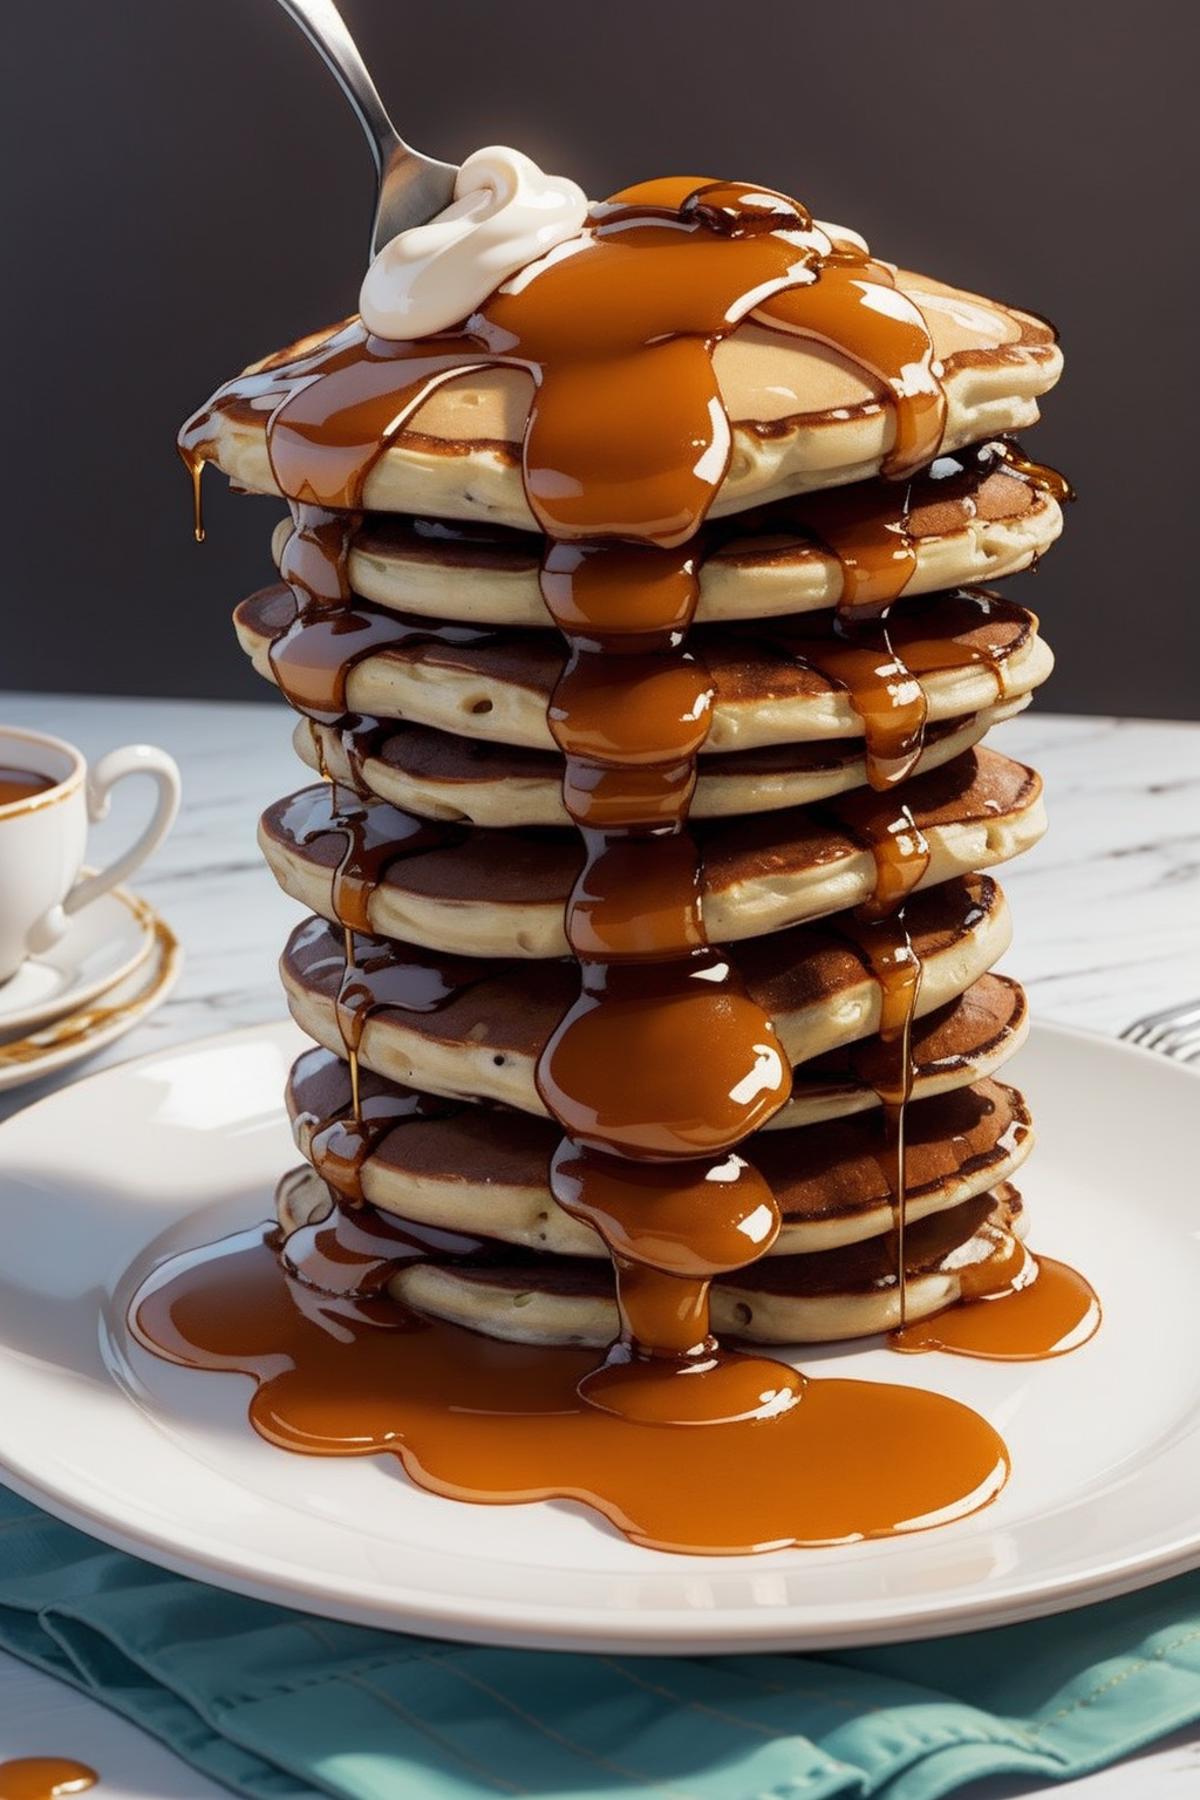 A tower of pancakes with syrup on a white plate.